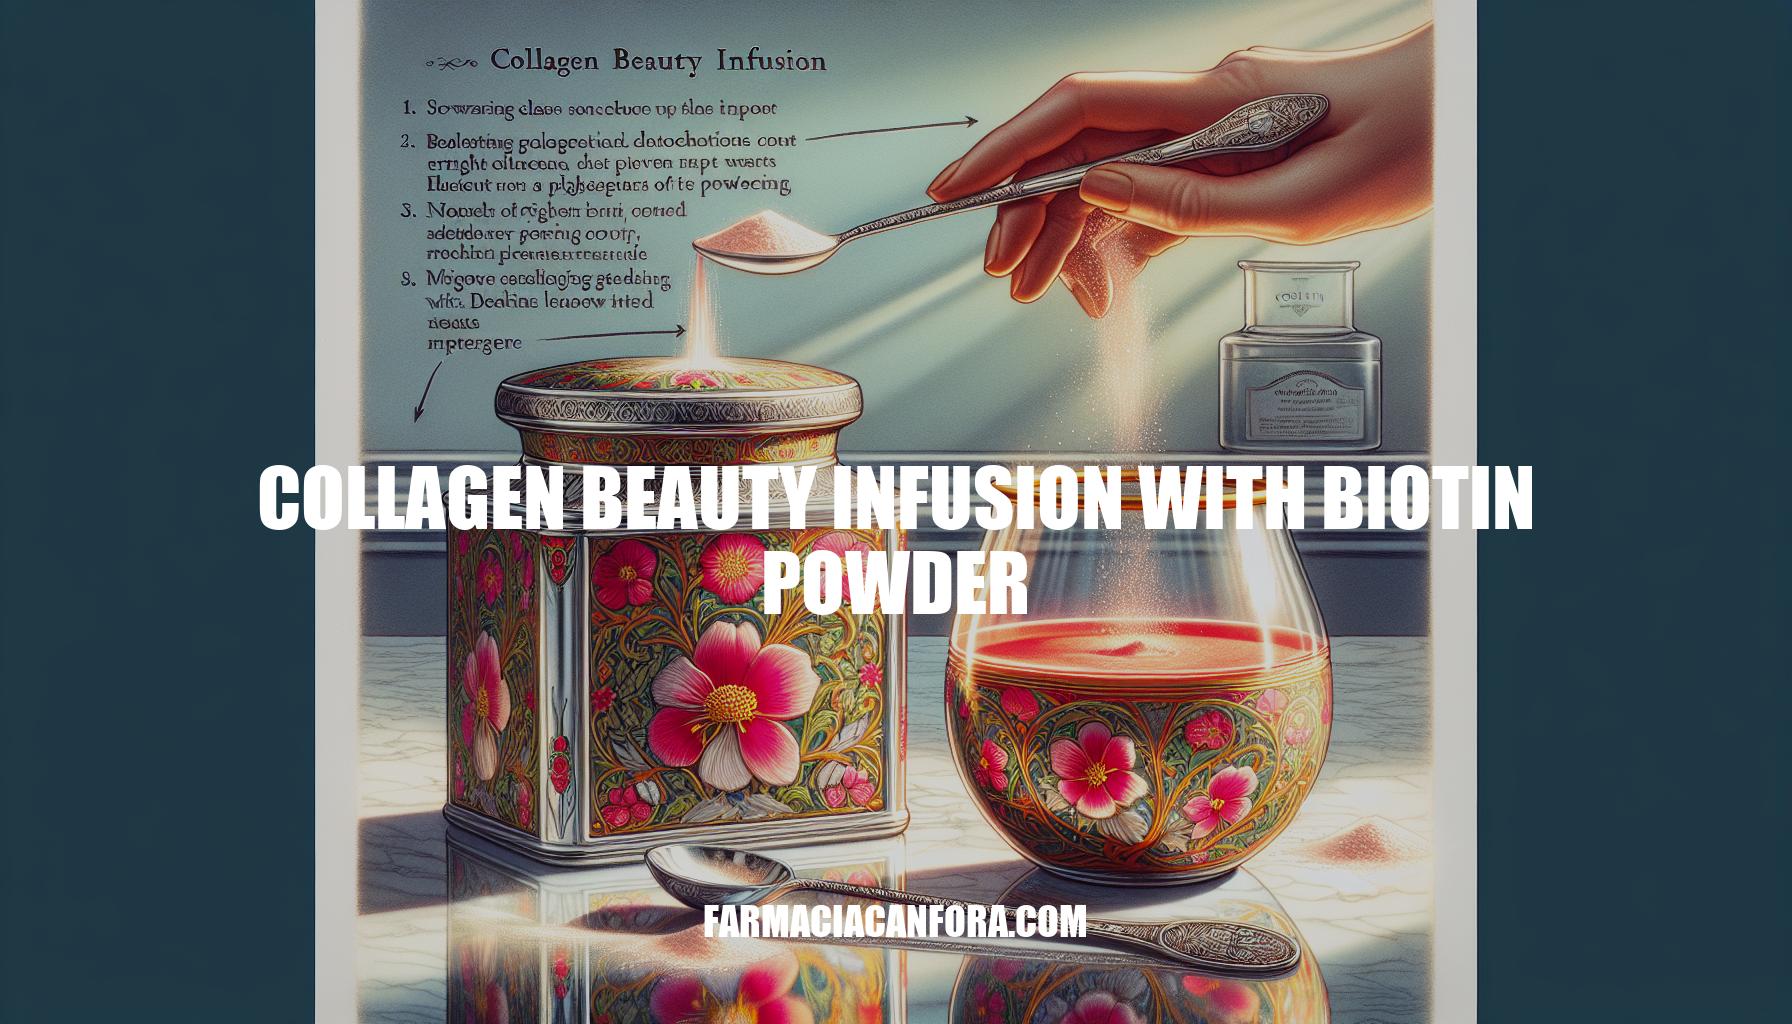 The Ultimate Guide to Collagen Beauty Infusion with Biotin Powder